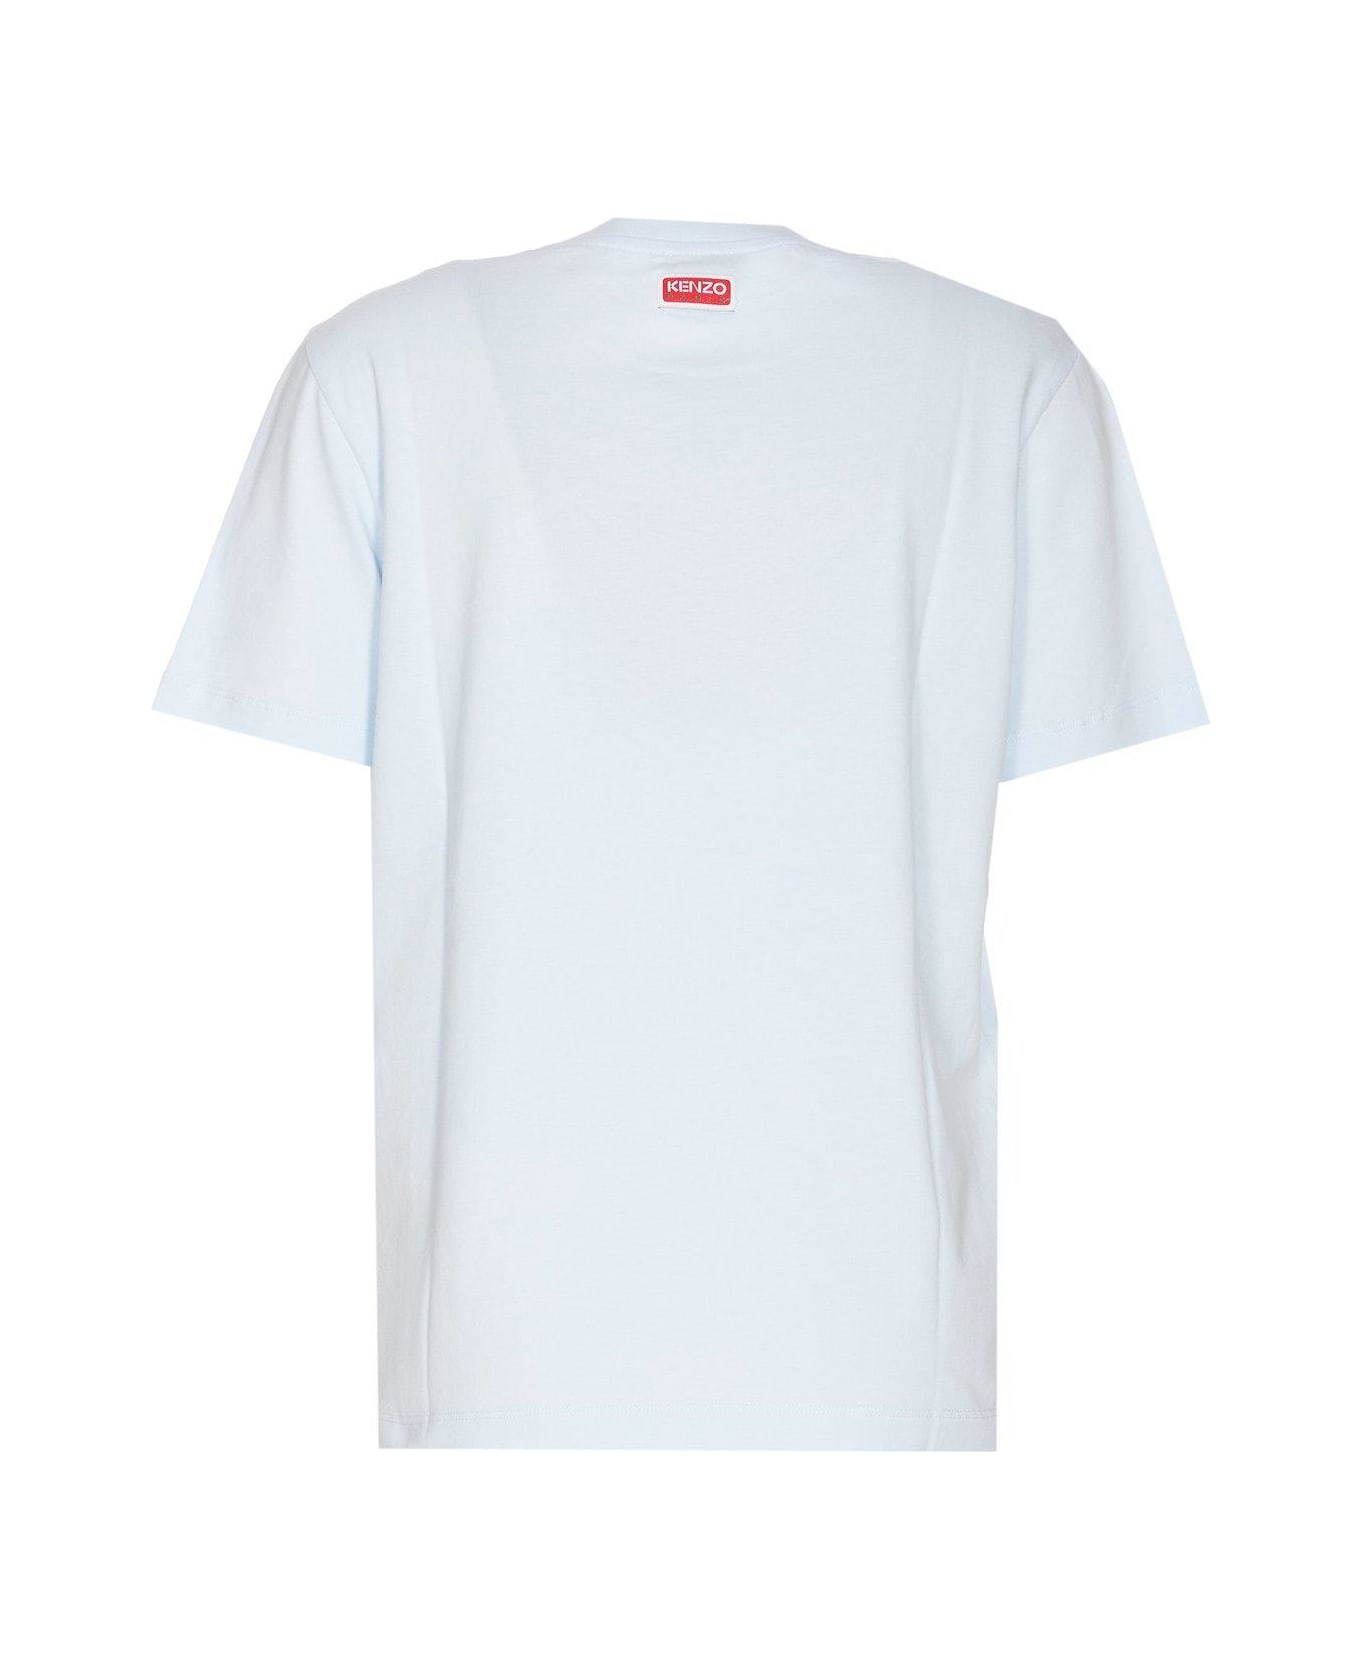 Kenzo T-shirt With Tiger Embroidery - LIGHT BLUE